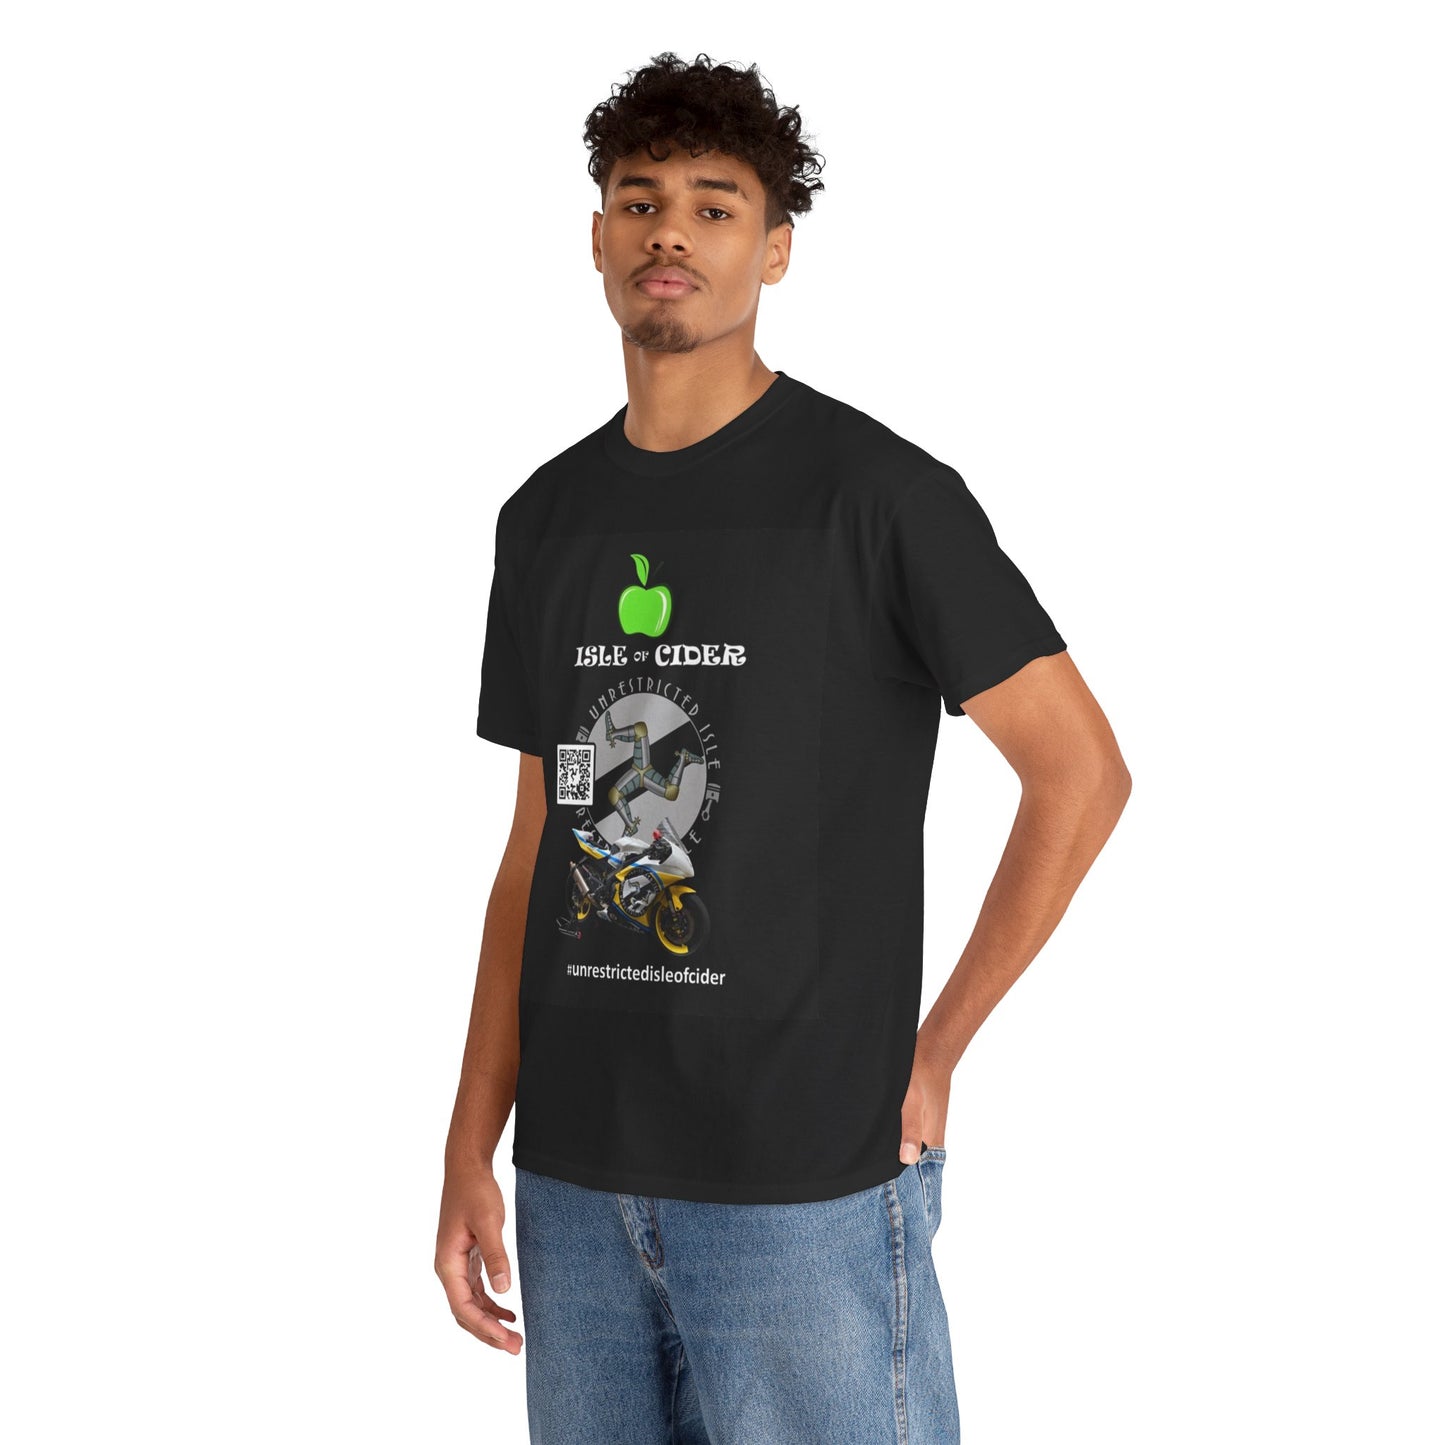 Unrestricted Isle of Cider T-Shirt